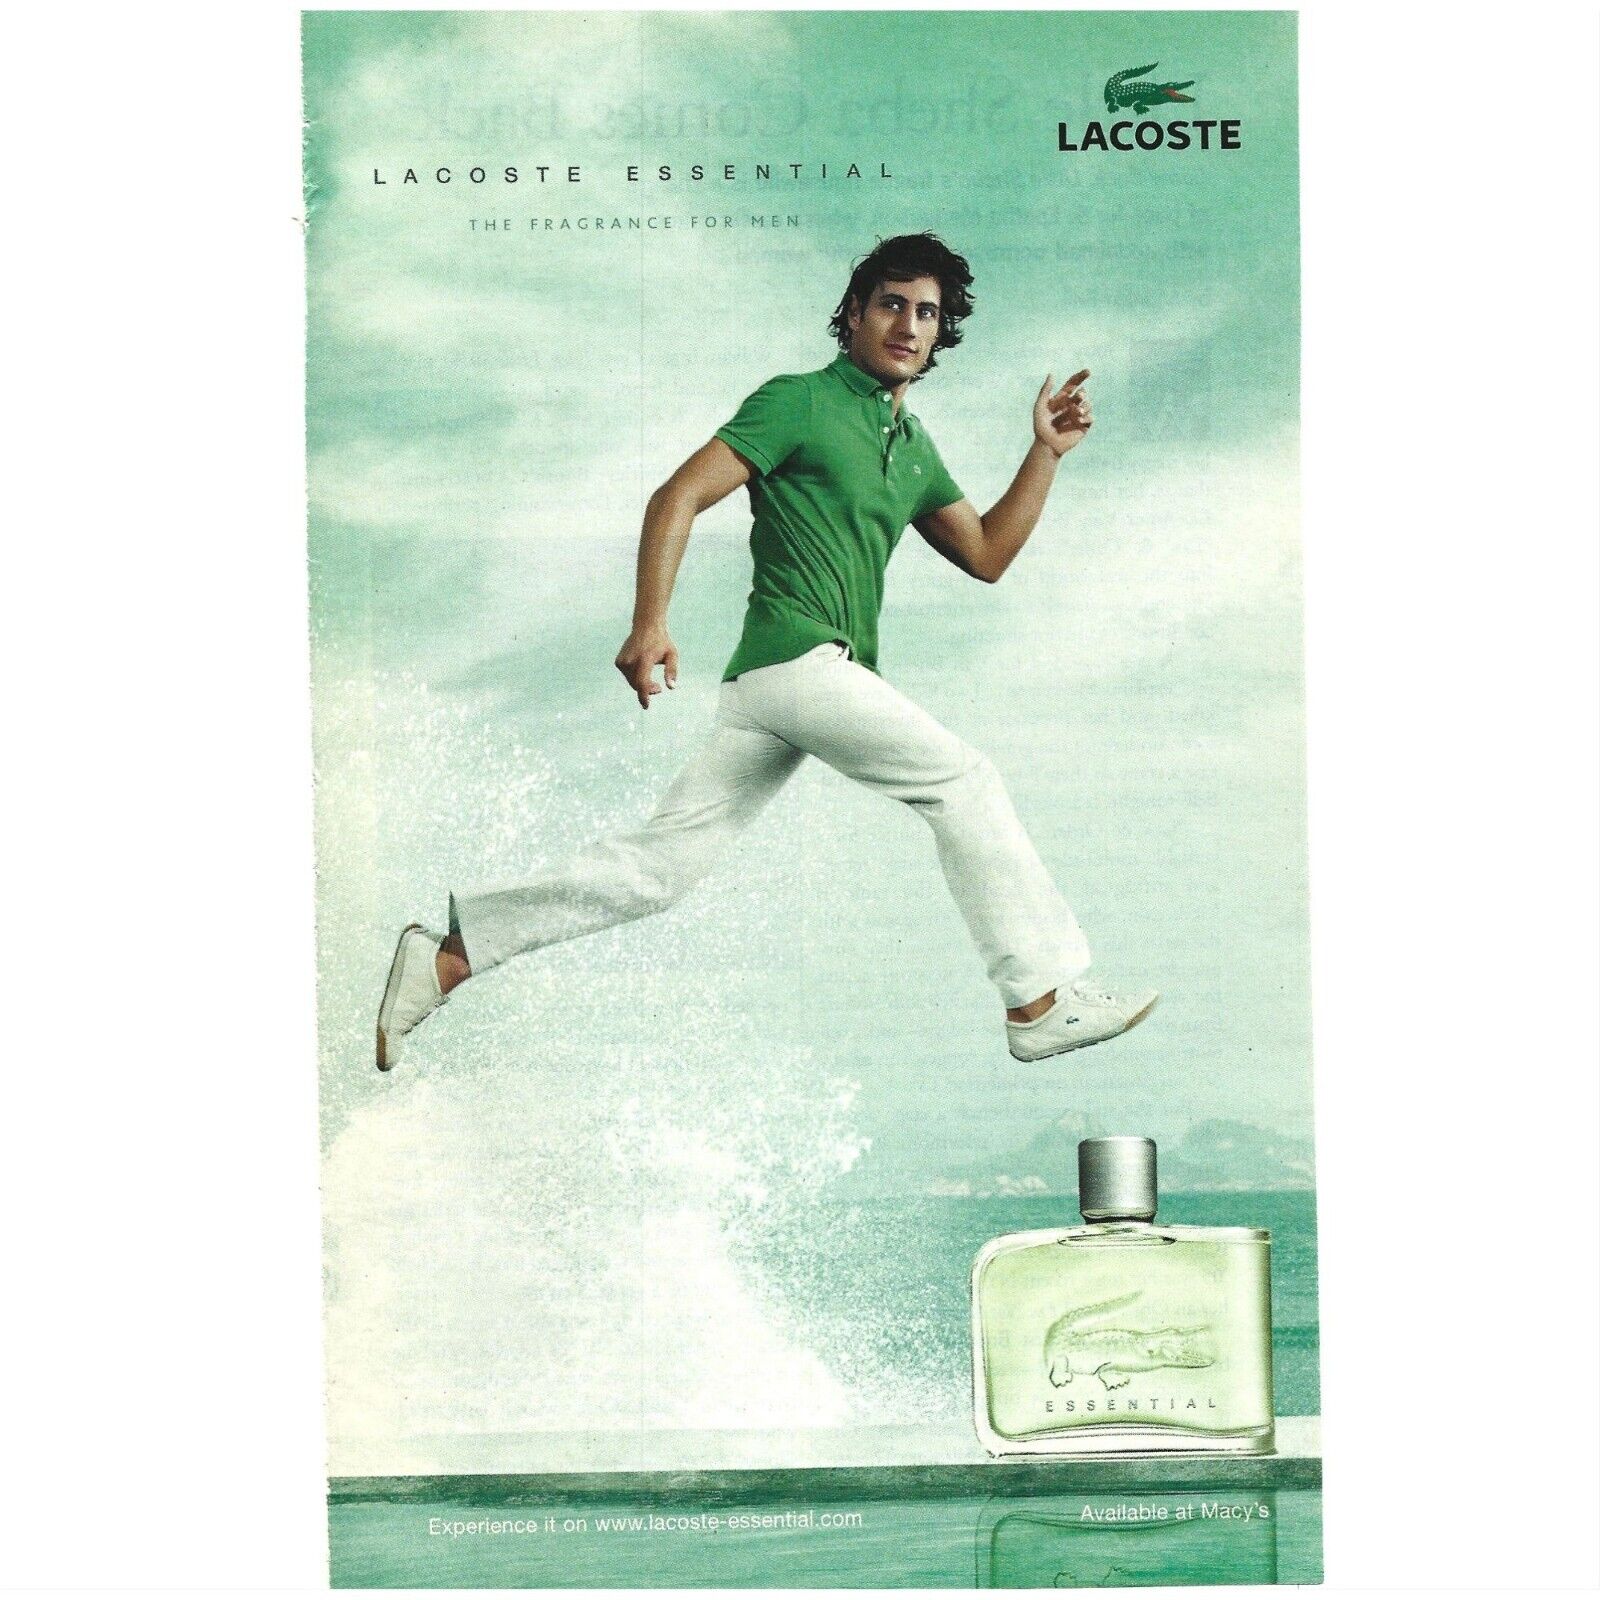 Lacoste Essential Fragrance for Men ADVERT Macy\'s 2000s Print Ad